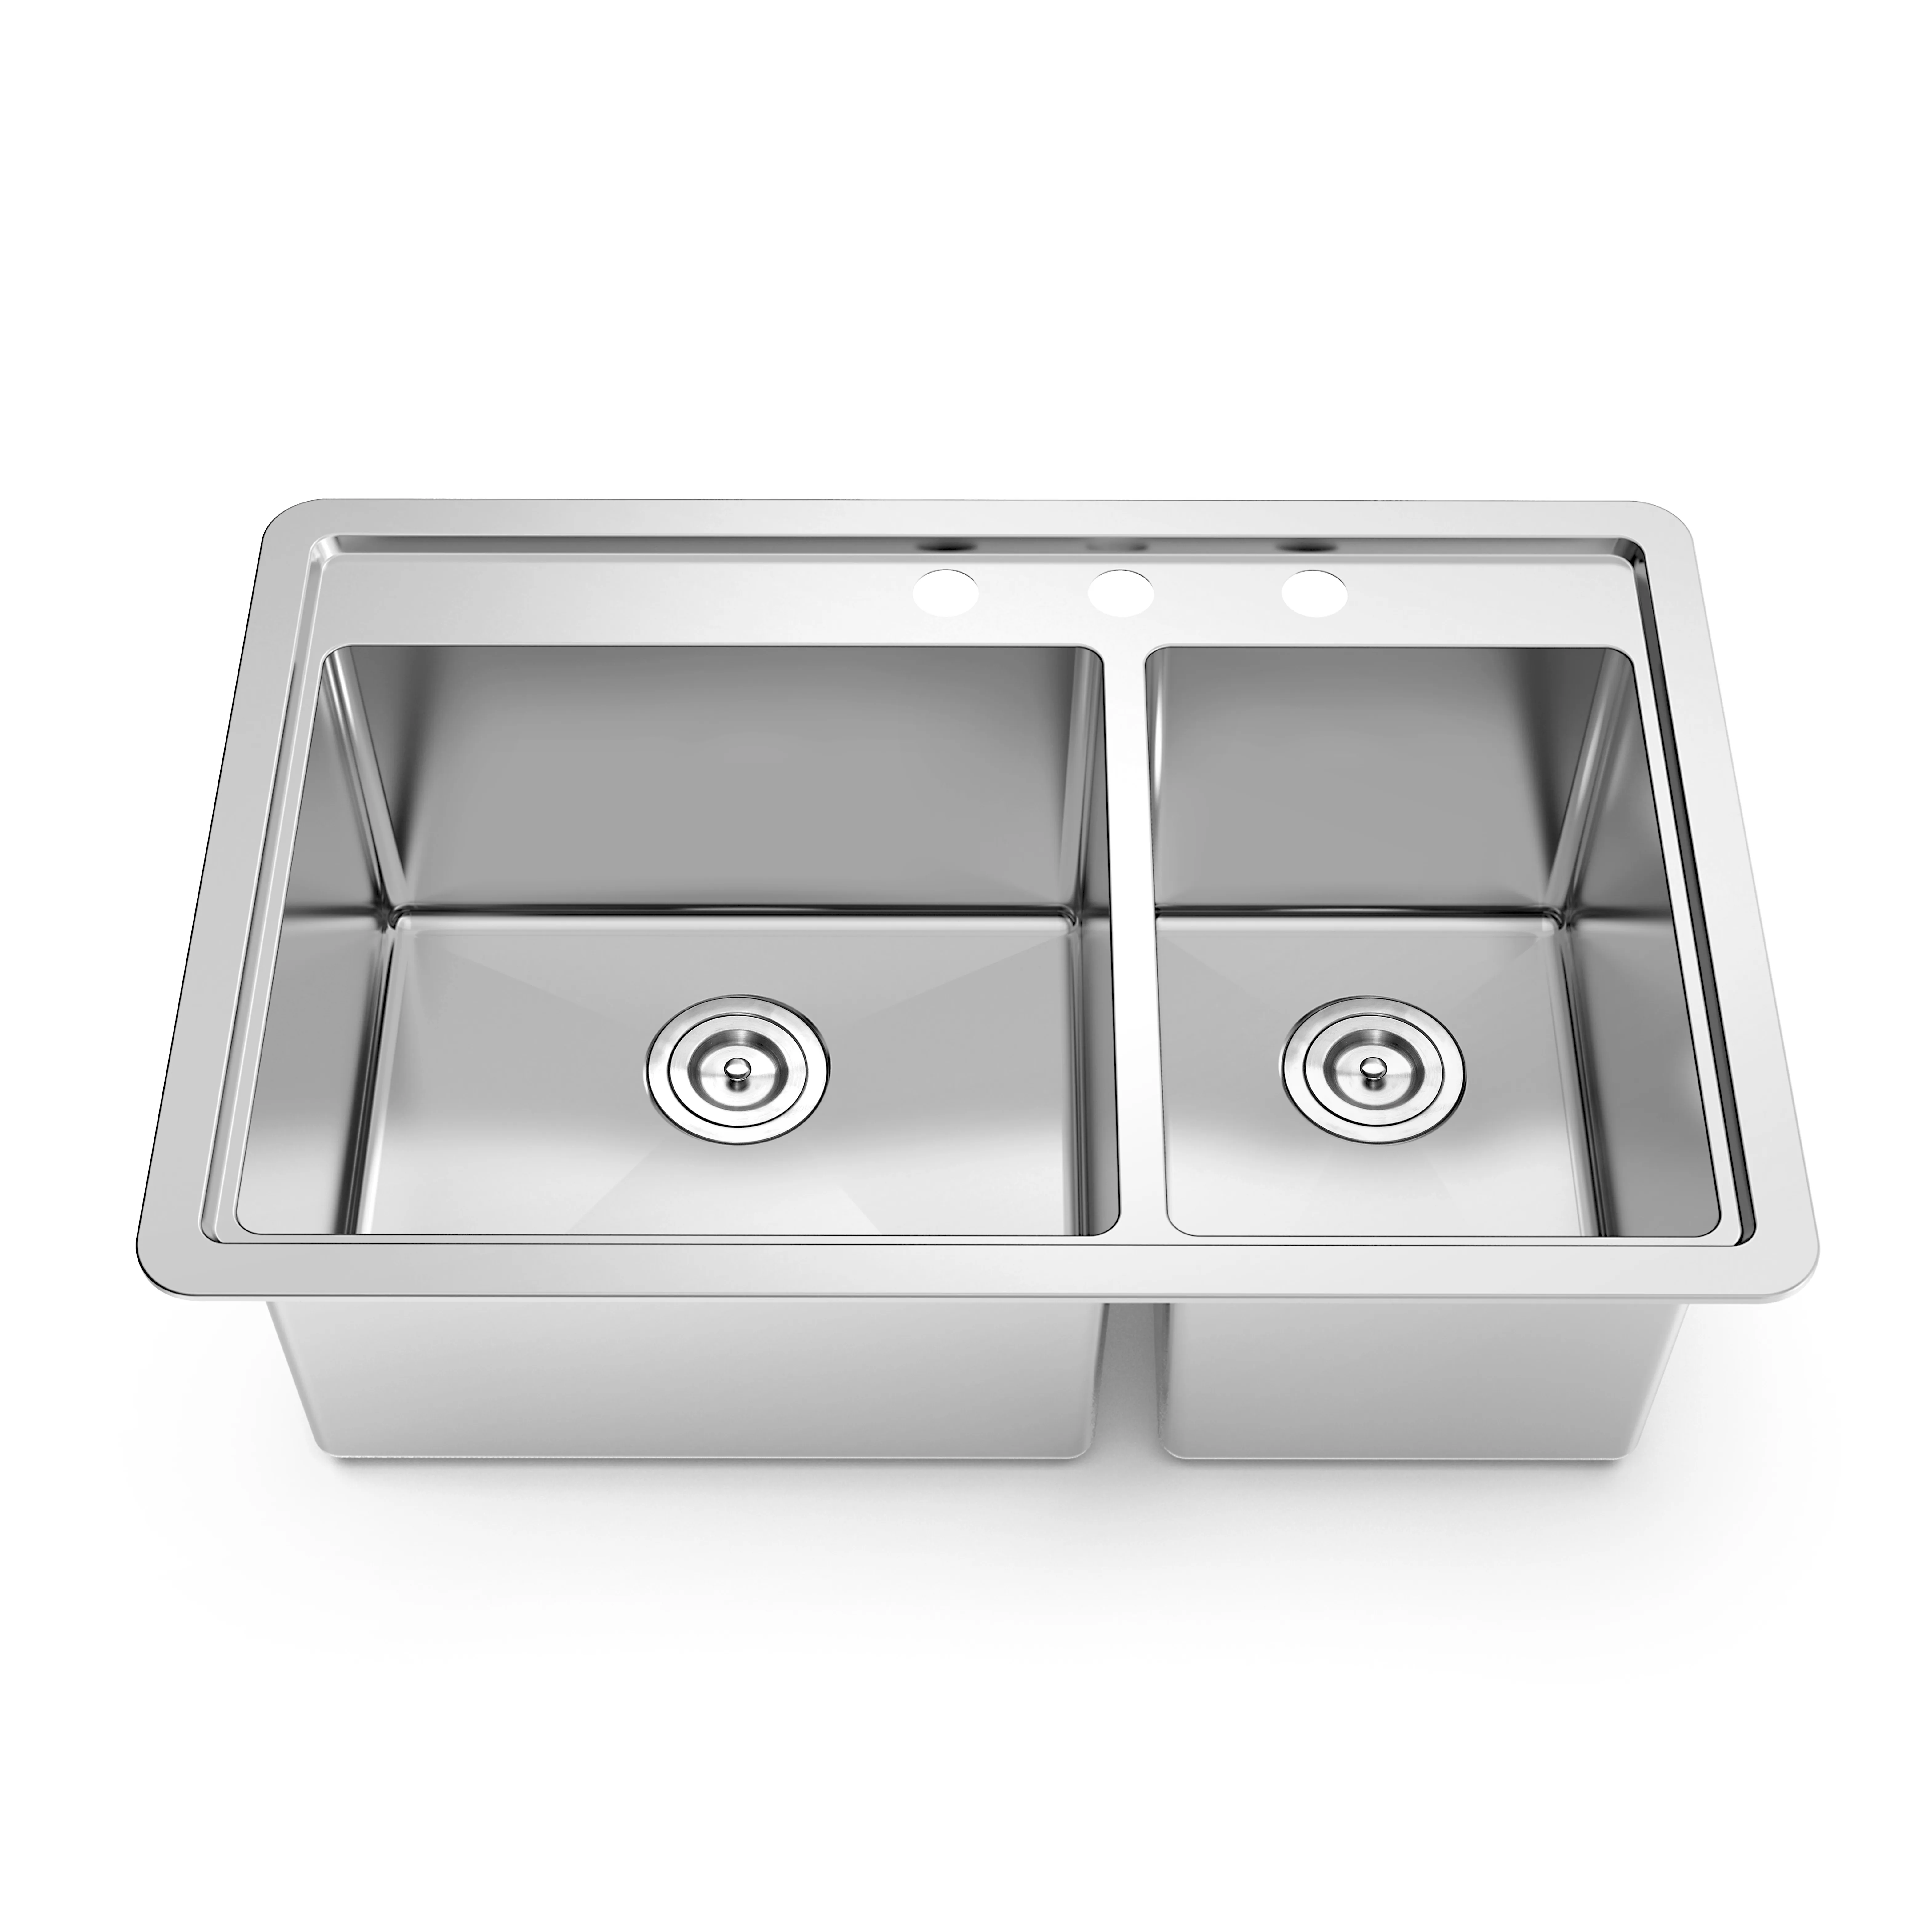 Stainless steel kitchen sink handmade sink bowl with pressed deck double bowl